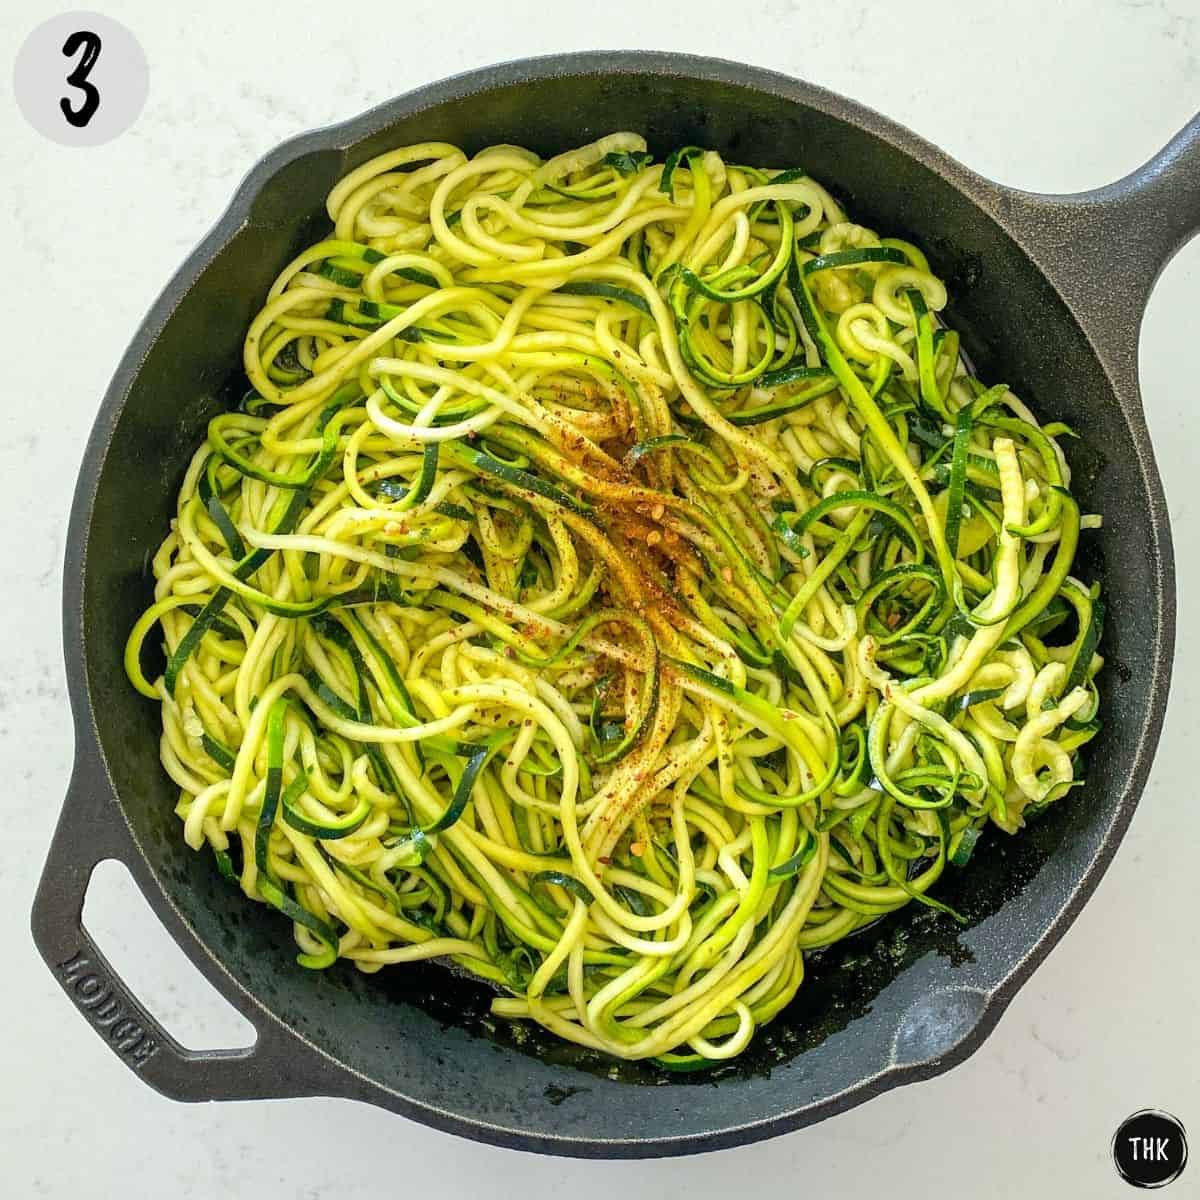 Cast iron pan with zucchini noodles inside.